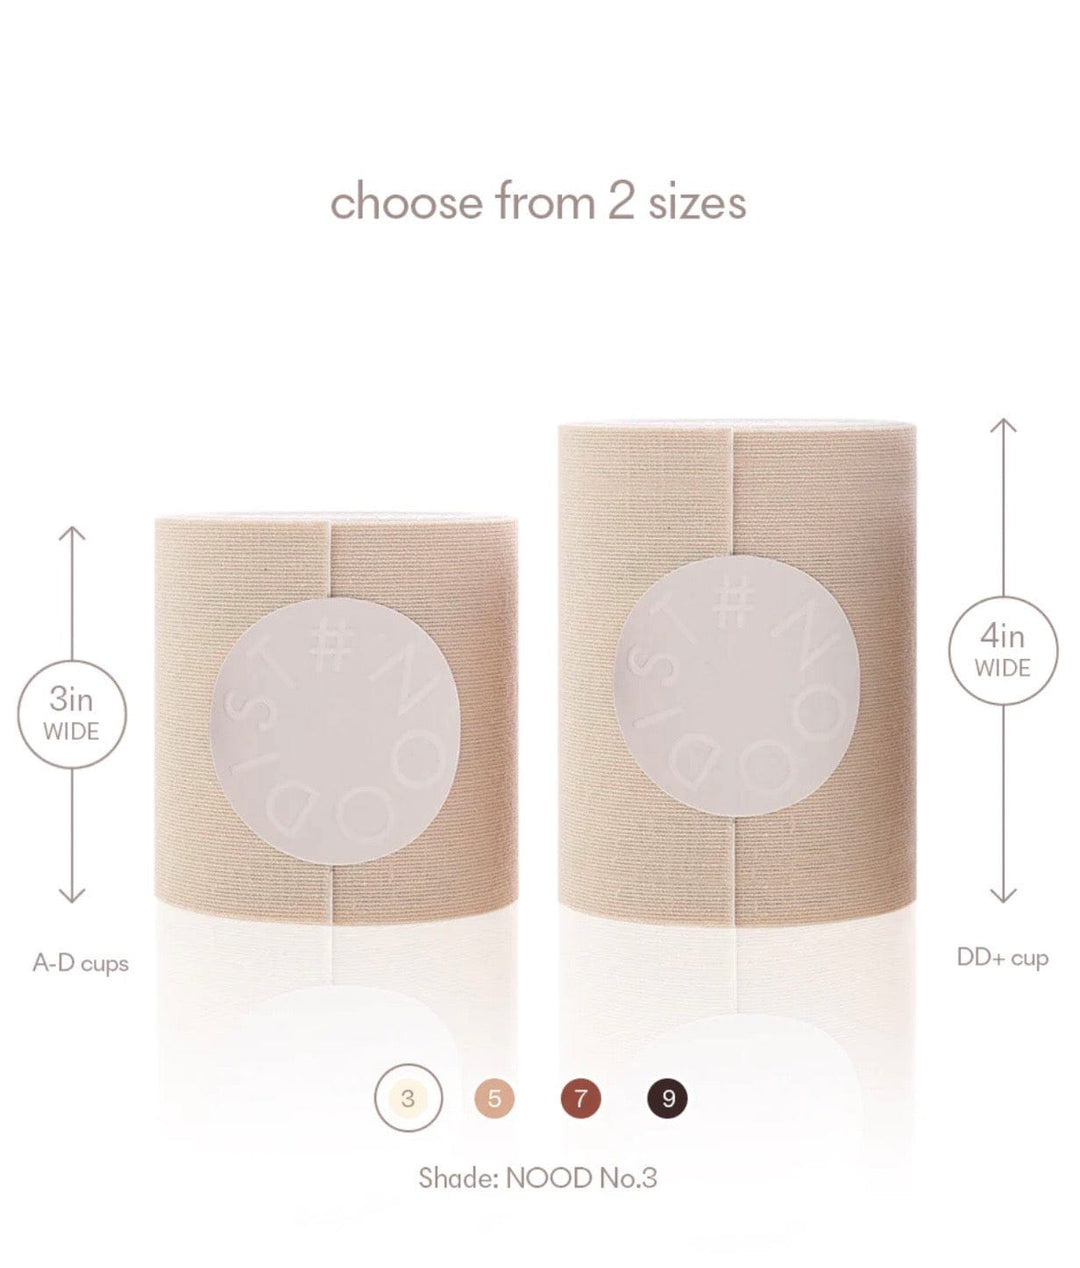 NOOD Adhesive Bra Tape NO. 3 / 4 in. NOOD Shape Tape